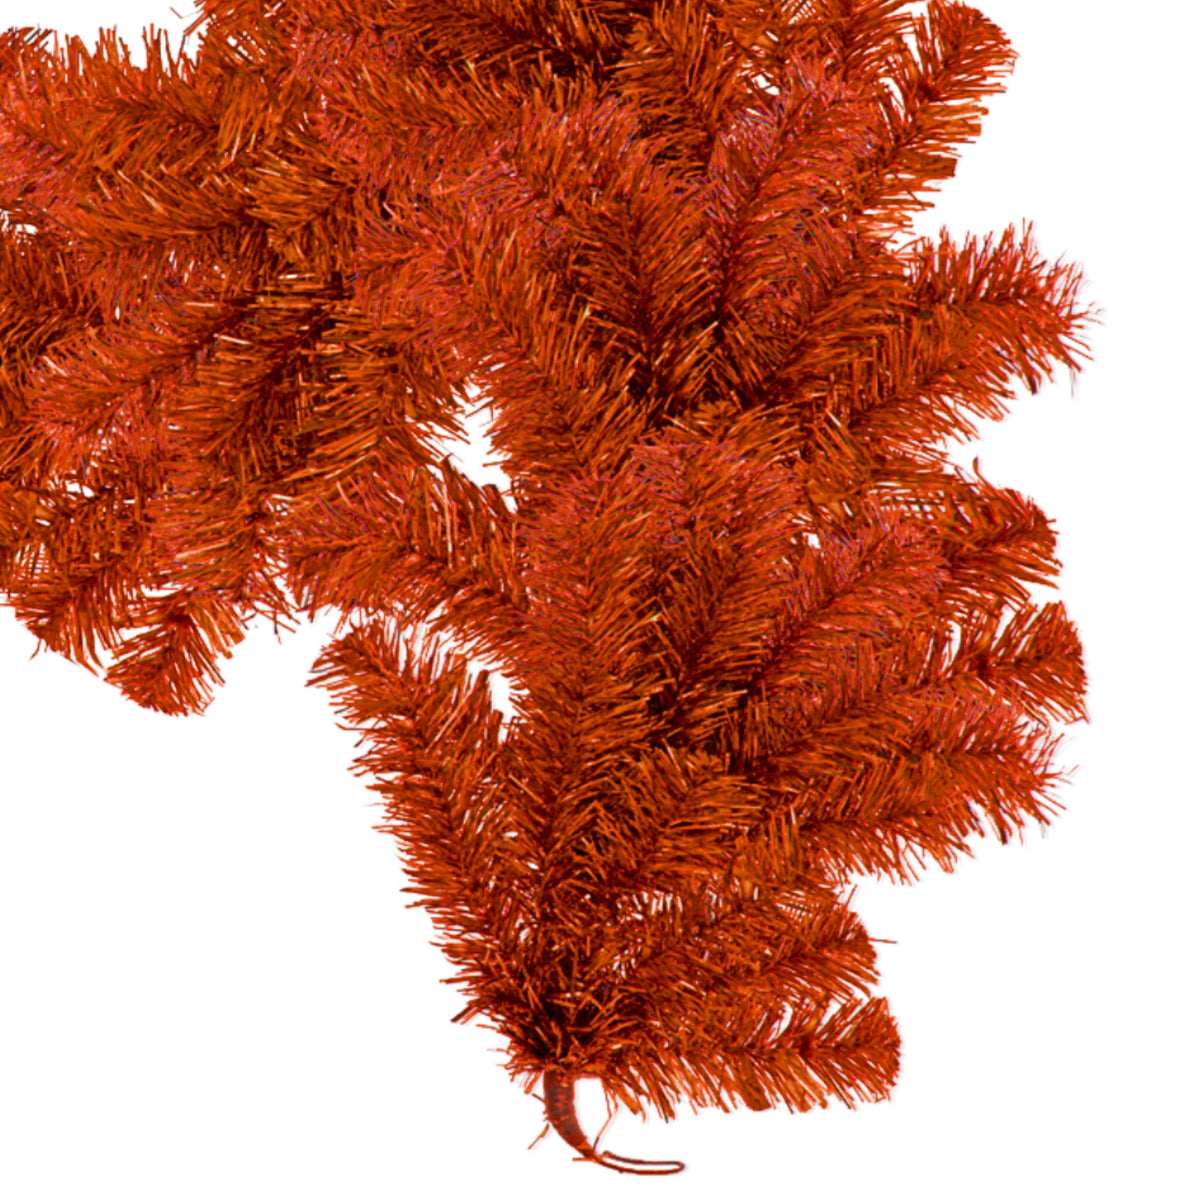 Shiny Orange Tinsel Brush Garland comes with wire on either end to hang from a hook